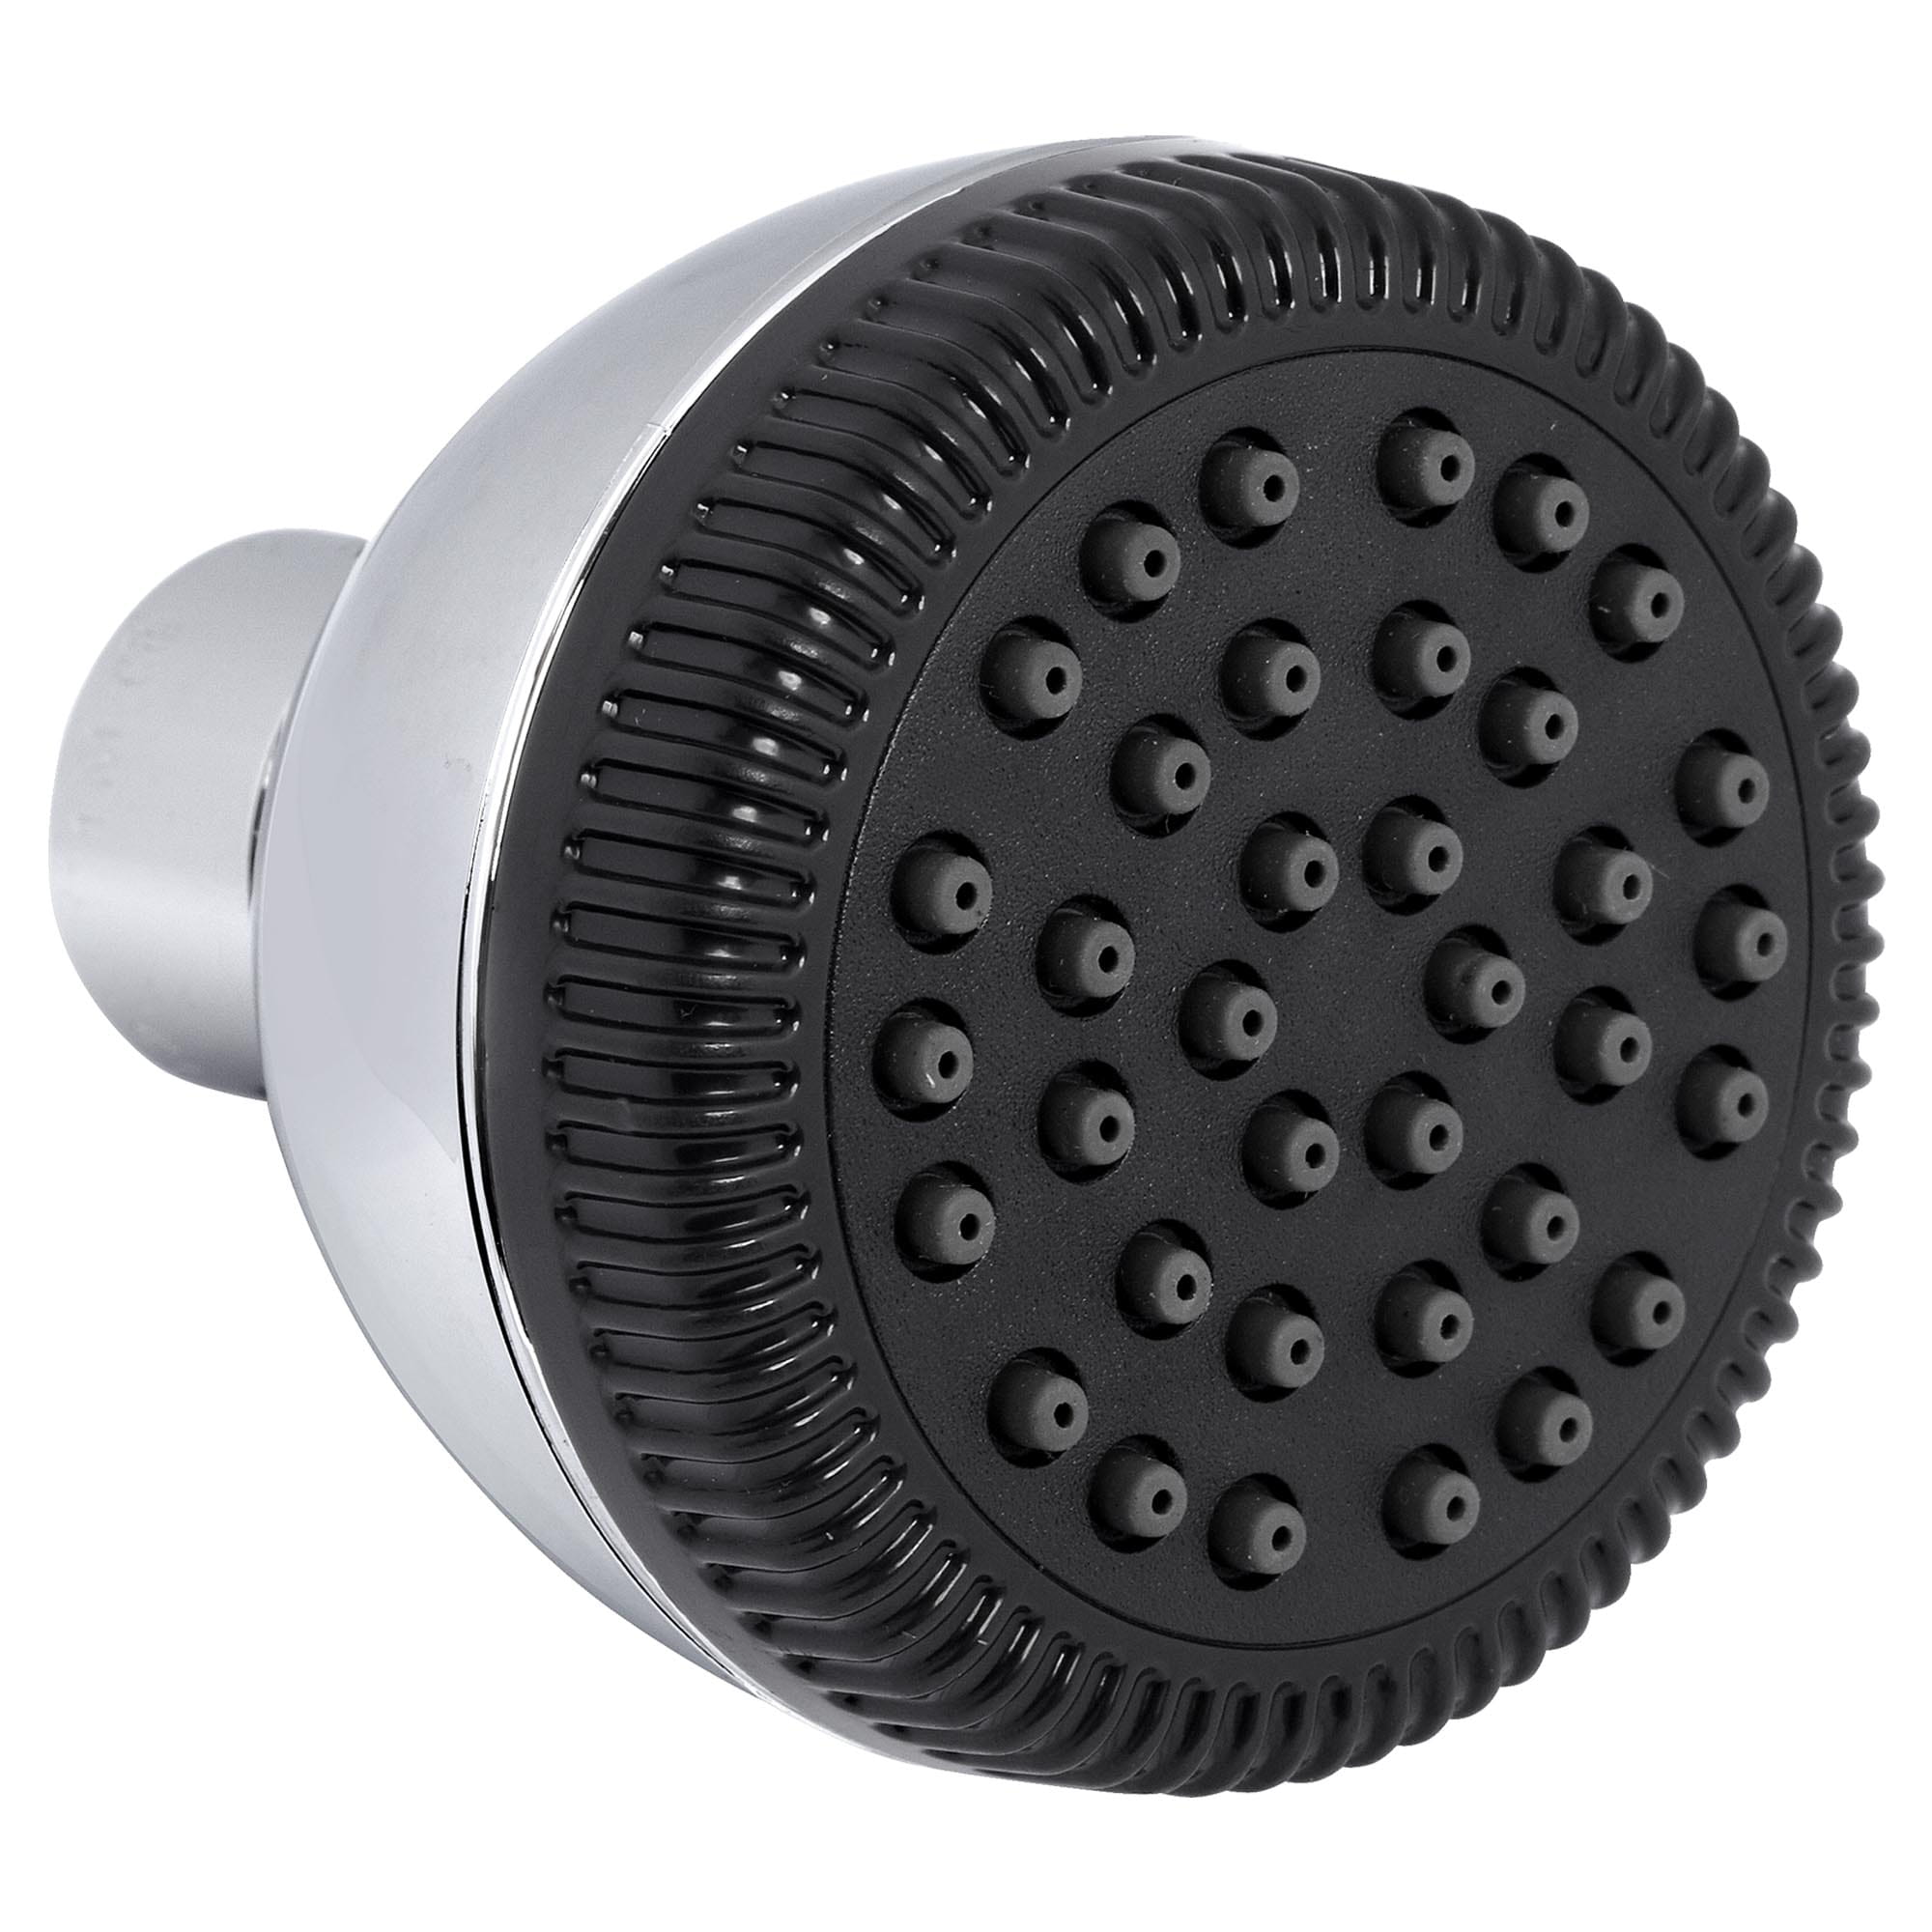 Easy Clean Single Function Showerhead for Colony®